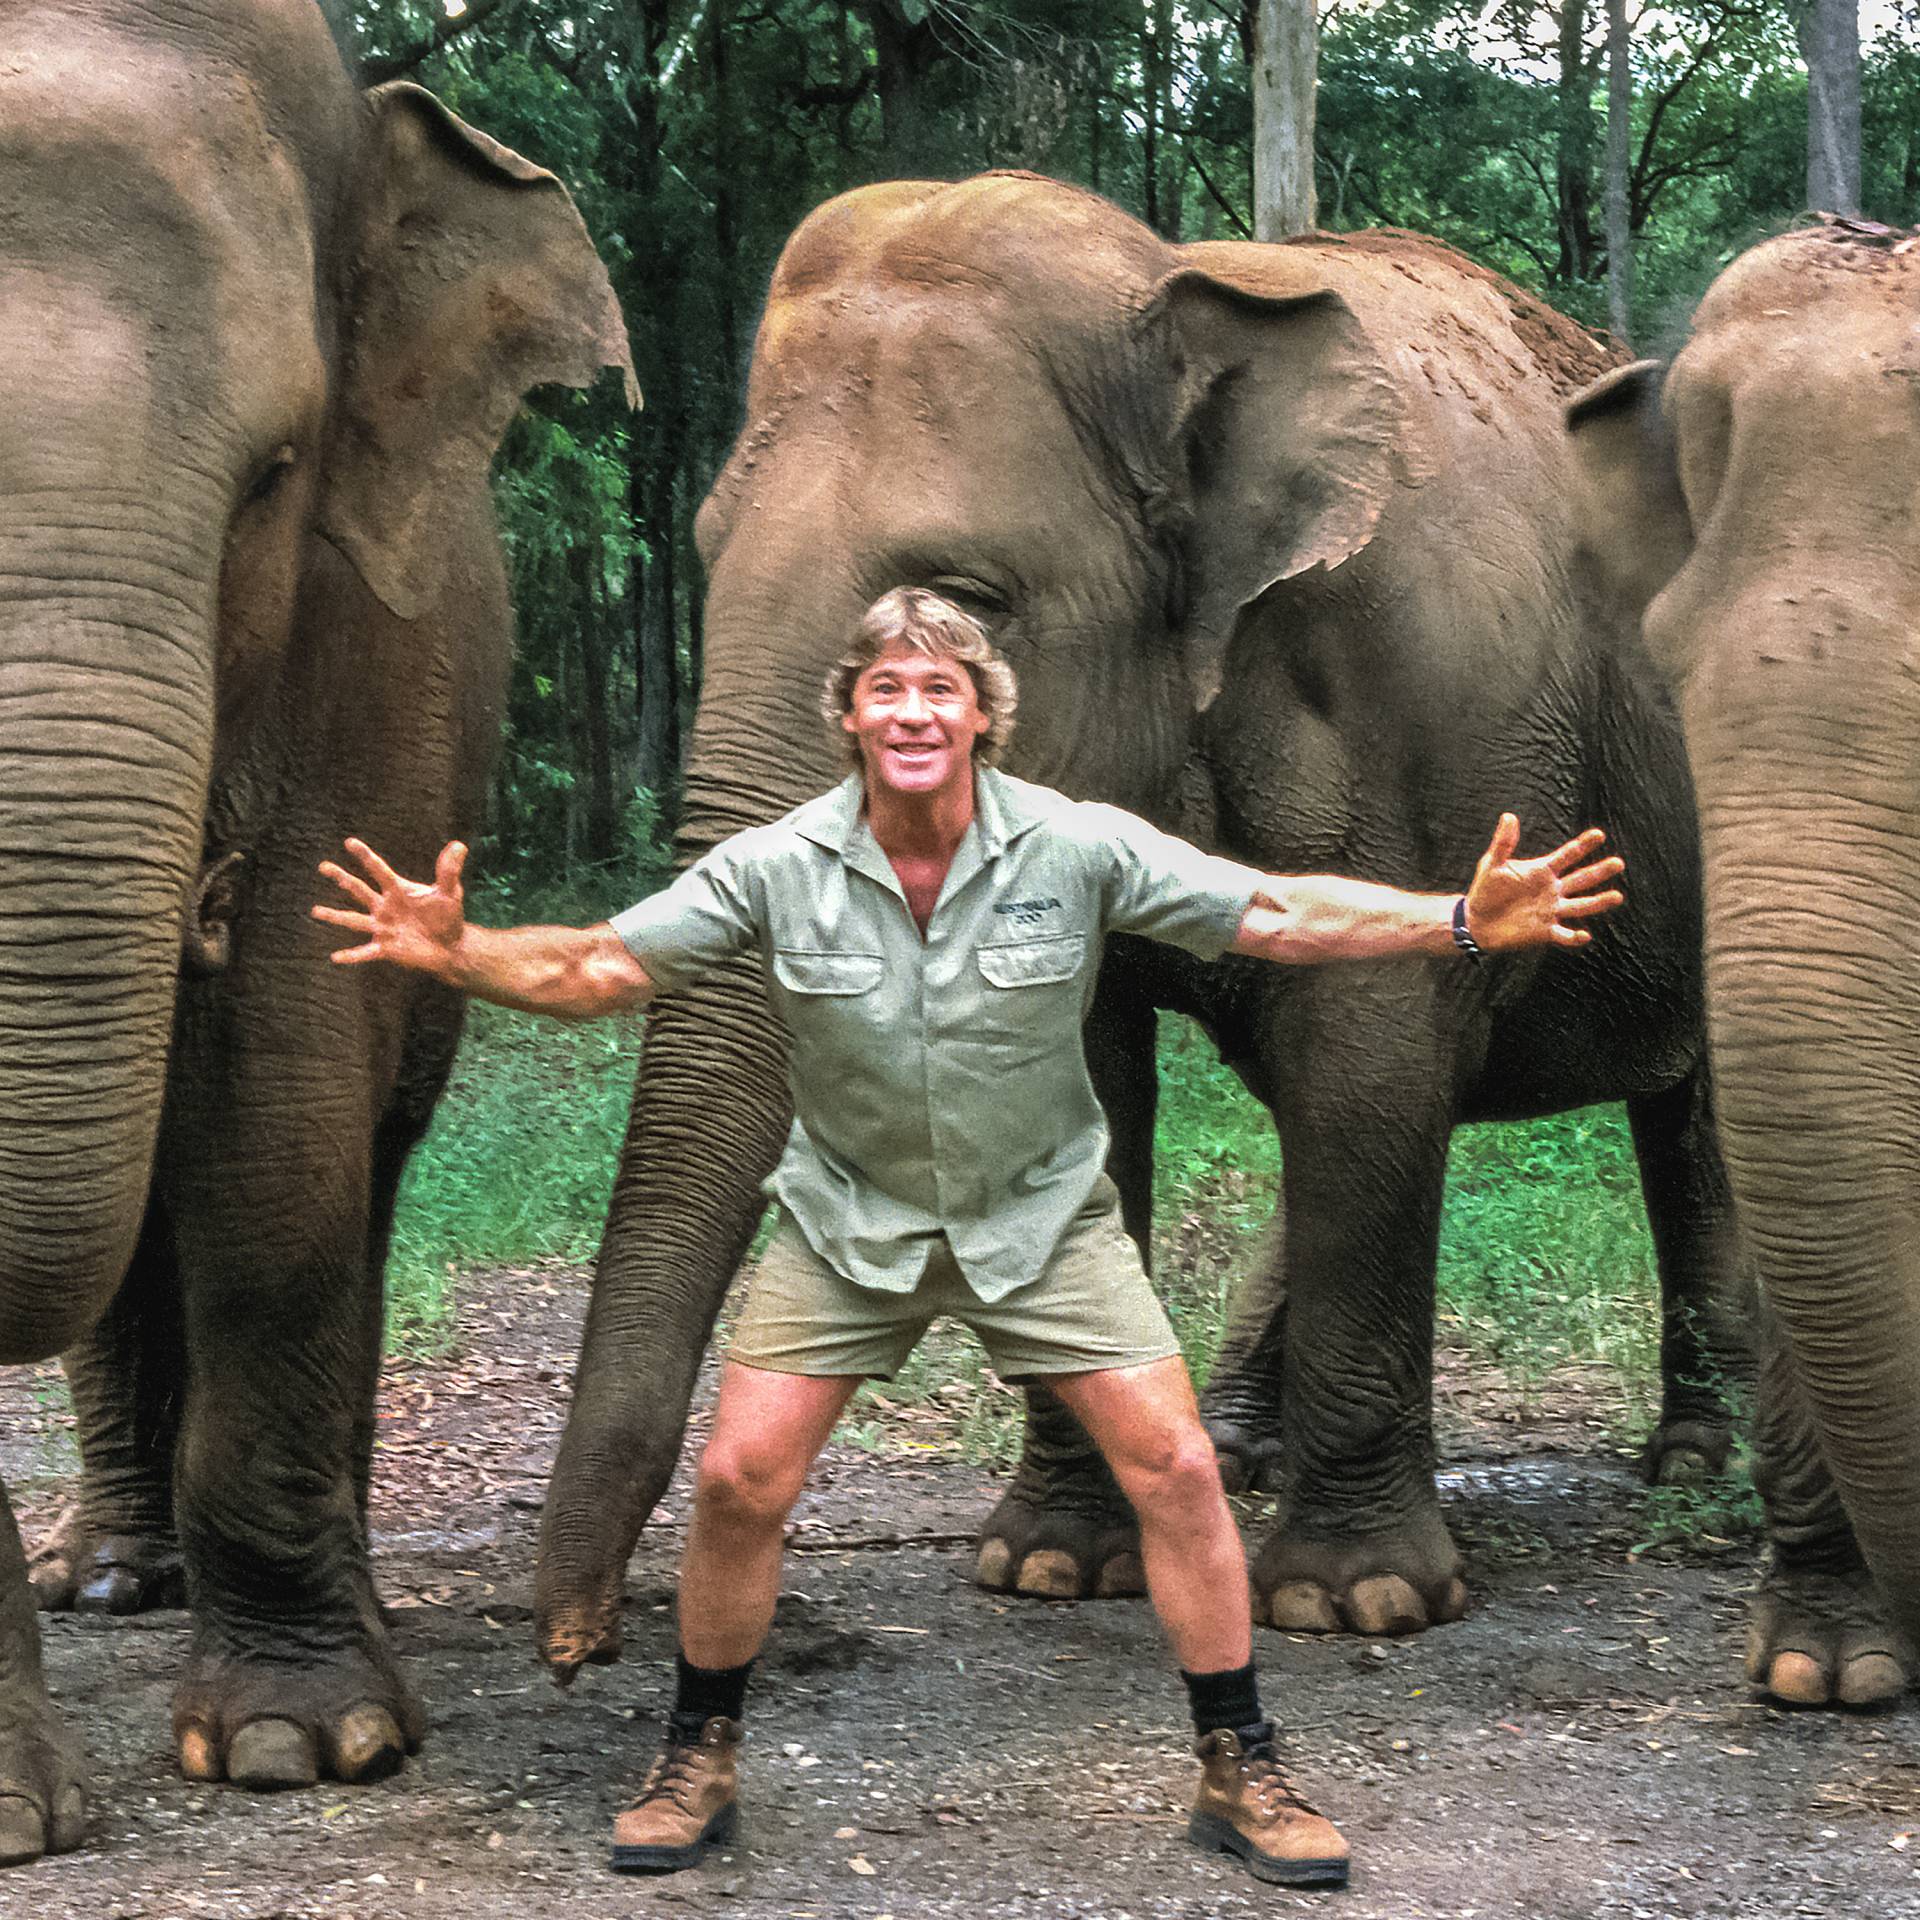 Stream The Steve Irwin Story | discovery+